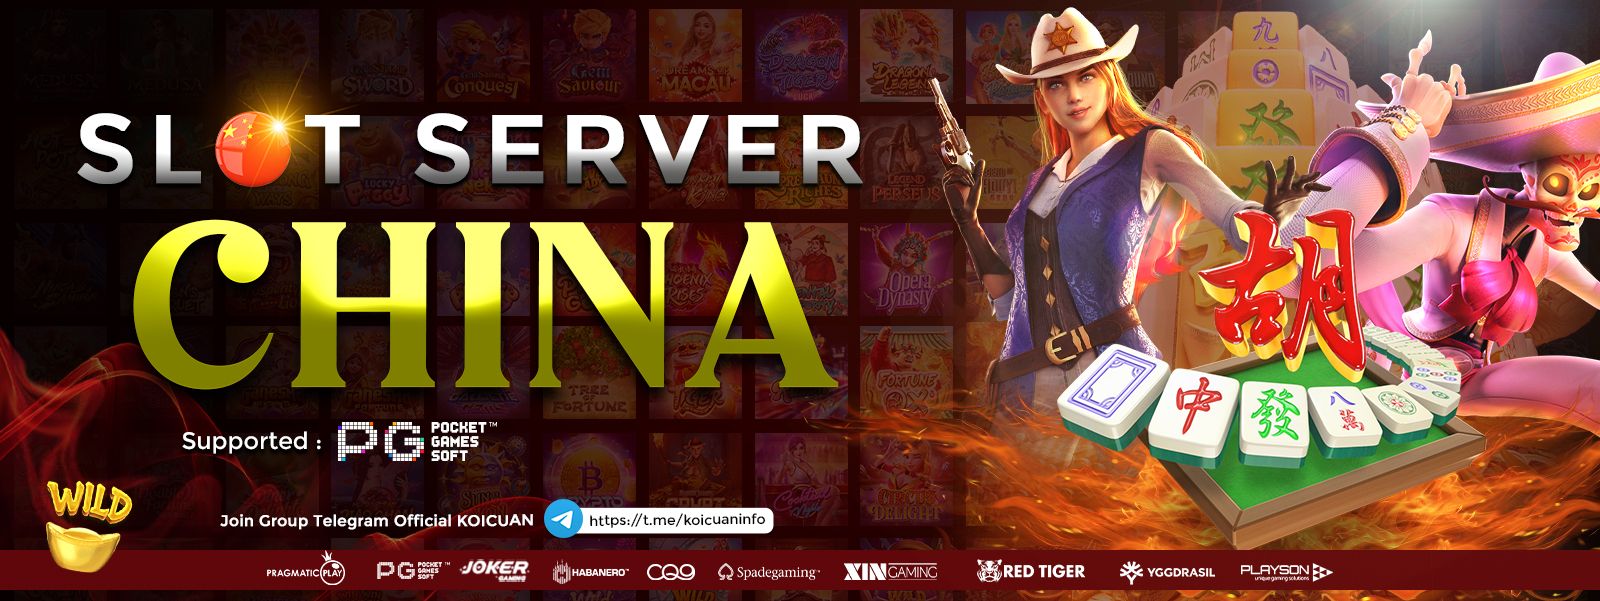 SLOT SERVER CHINA Supported : PG SOFT